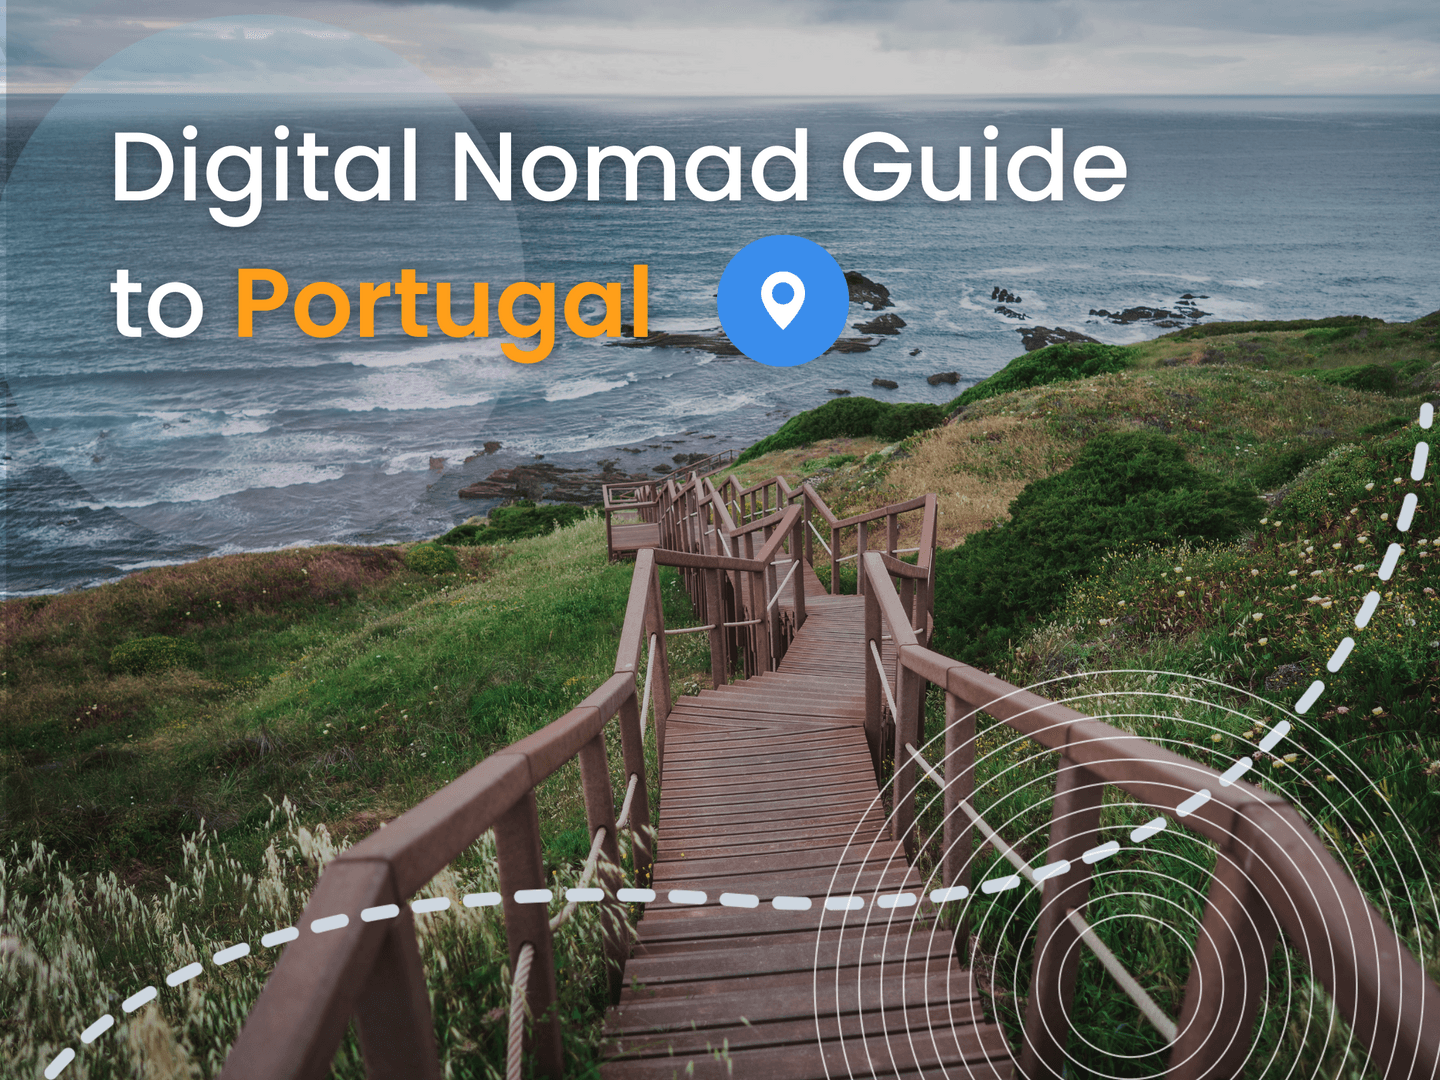 Digital Nomad Guide to Portugal